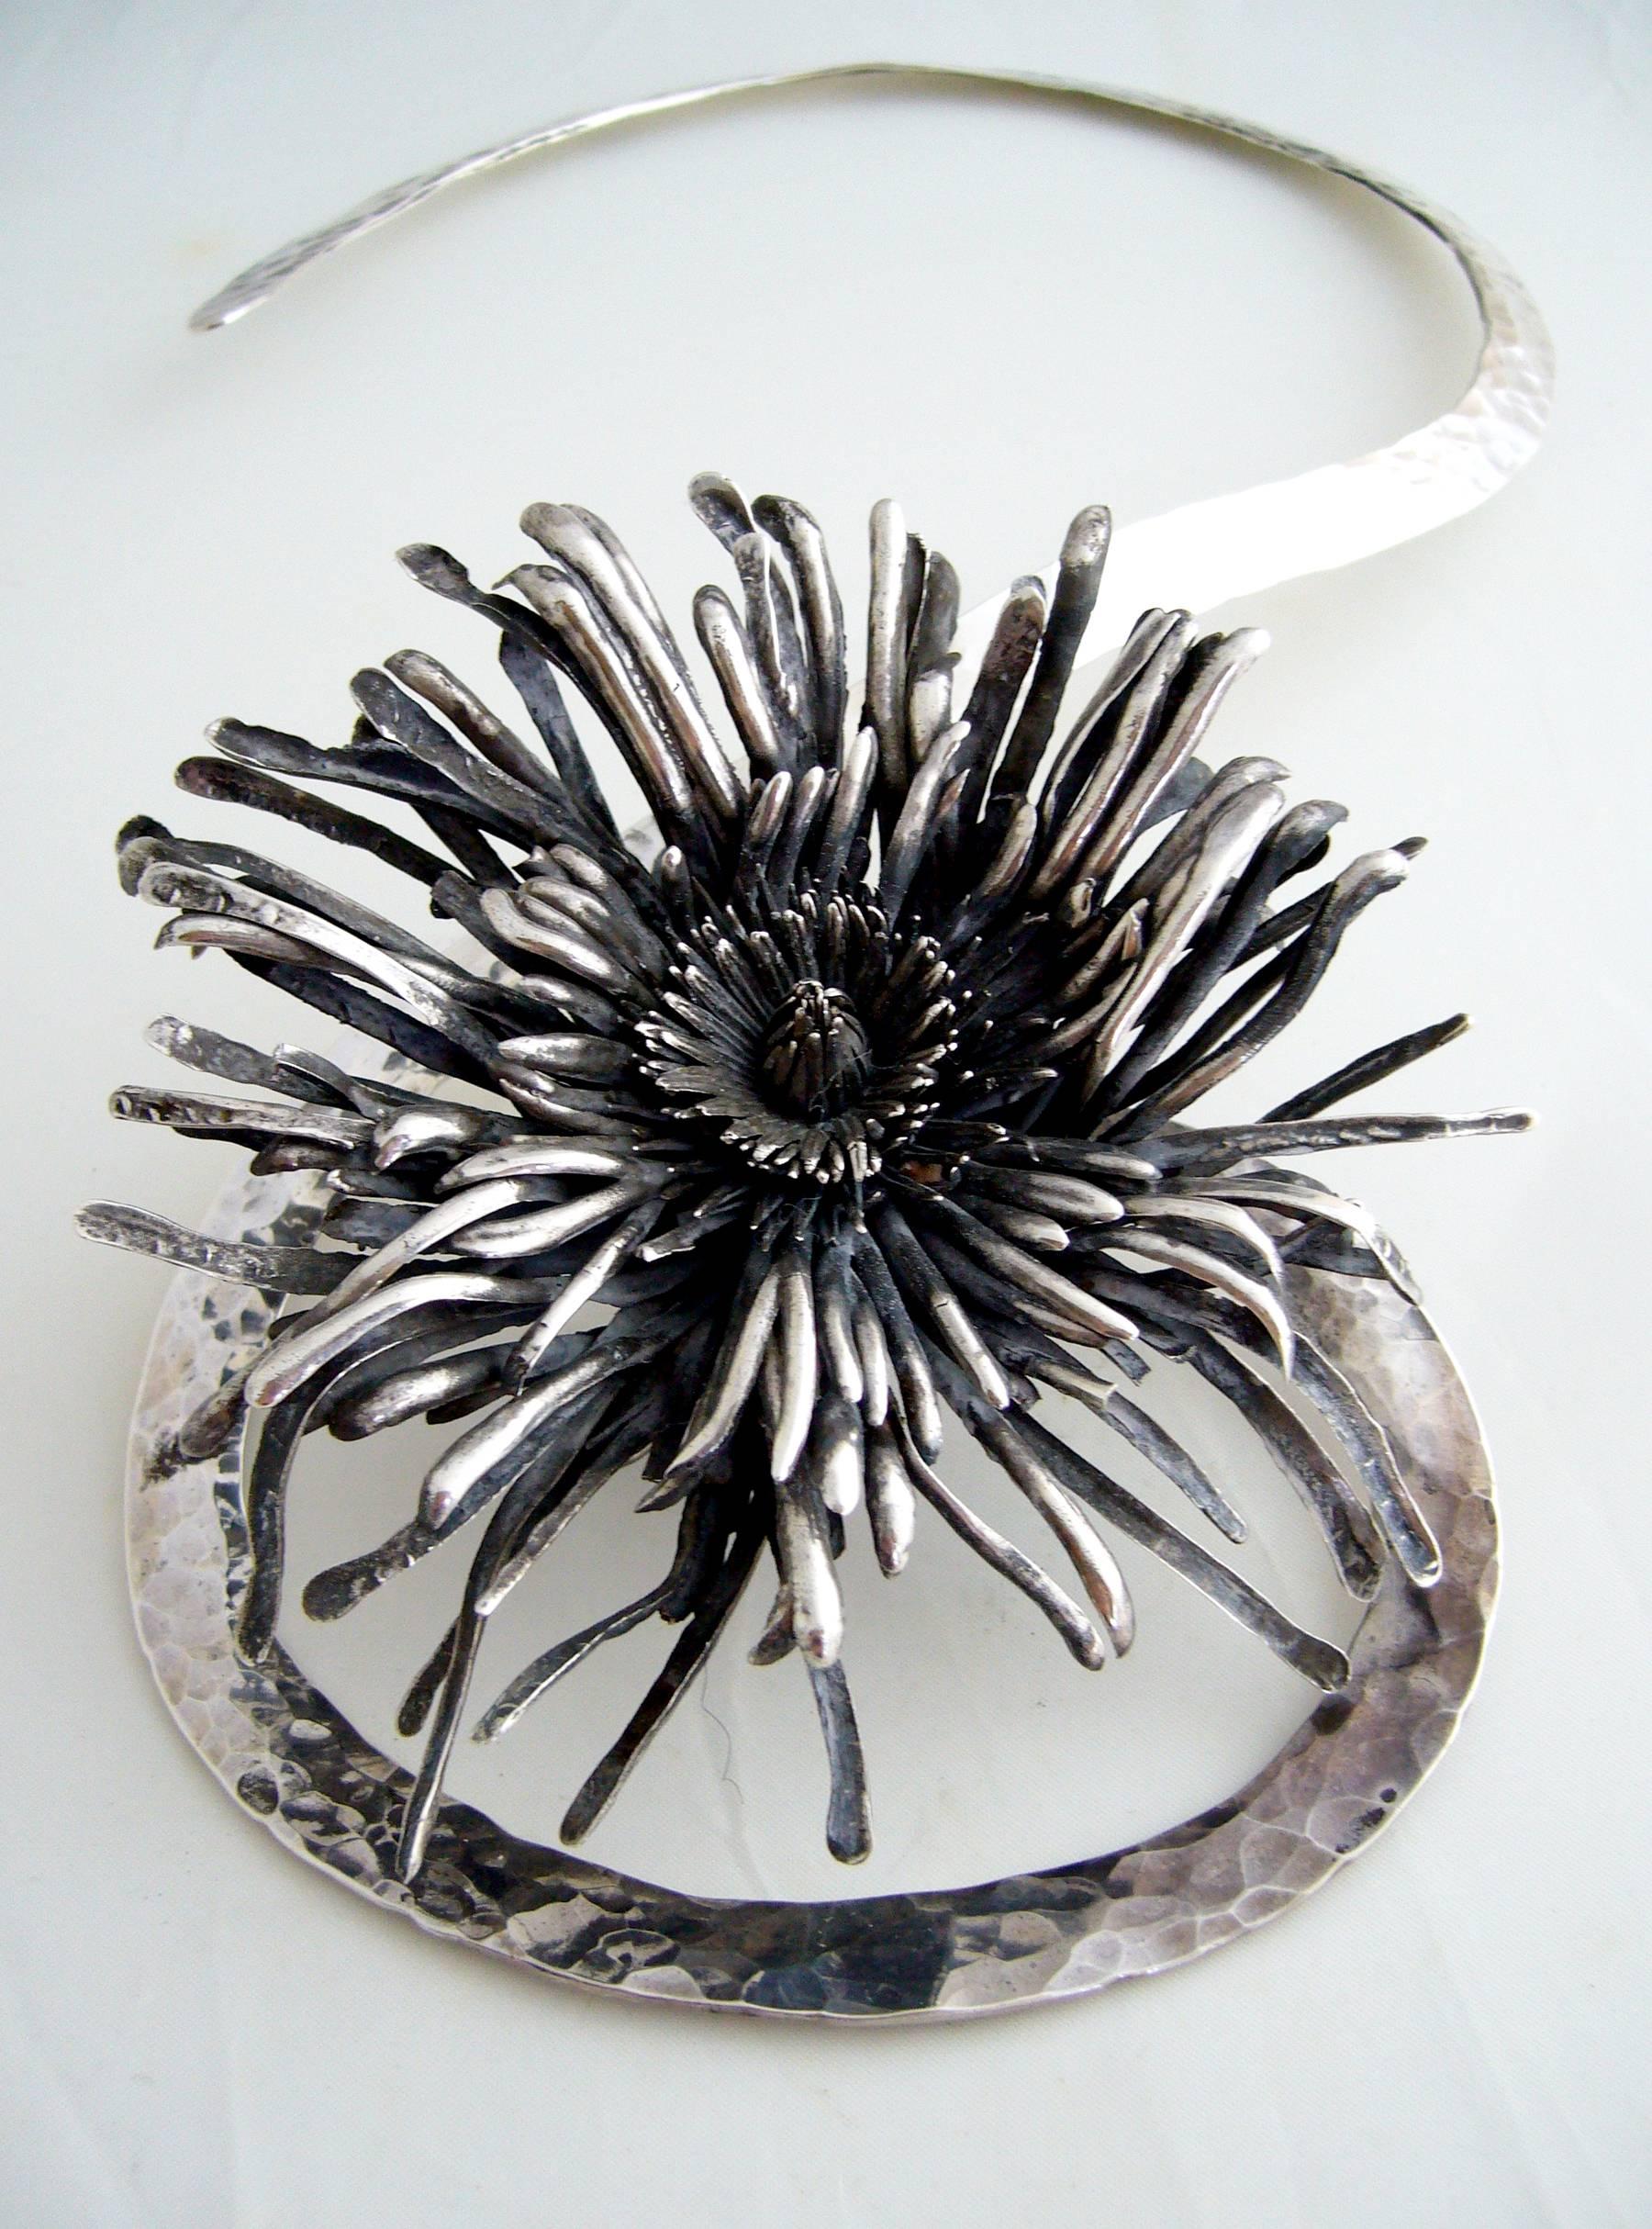 Large scale sterling silver chrysanthemum necklace created by Aaron Rubinstein, circa 1980's.  Torque curls around the back of the neck and continues into a pendant drop of about 5.5